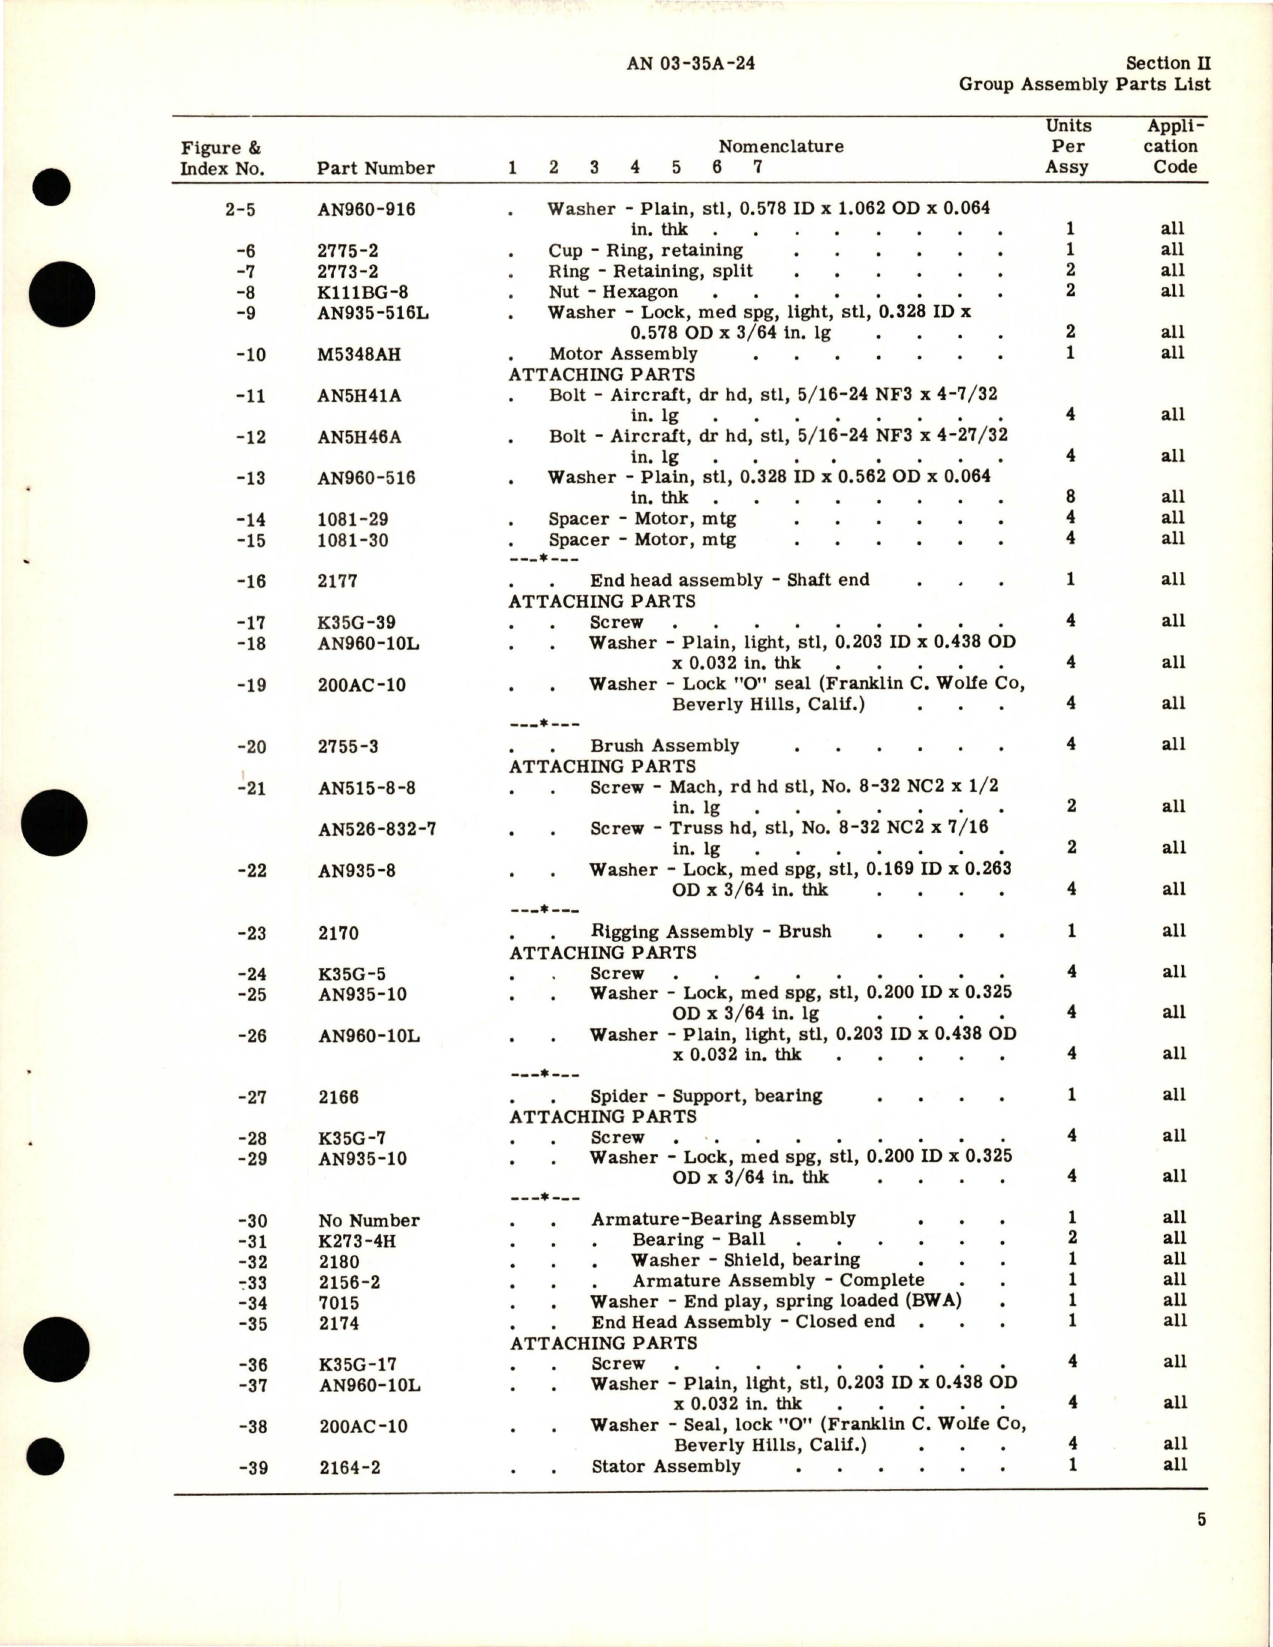 Sample page 7 from AirCorps Library document: Parts Catalog for Blower Assemblies